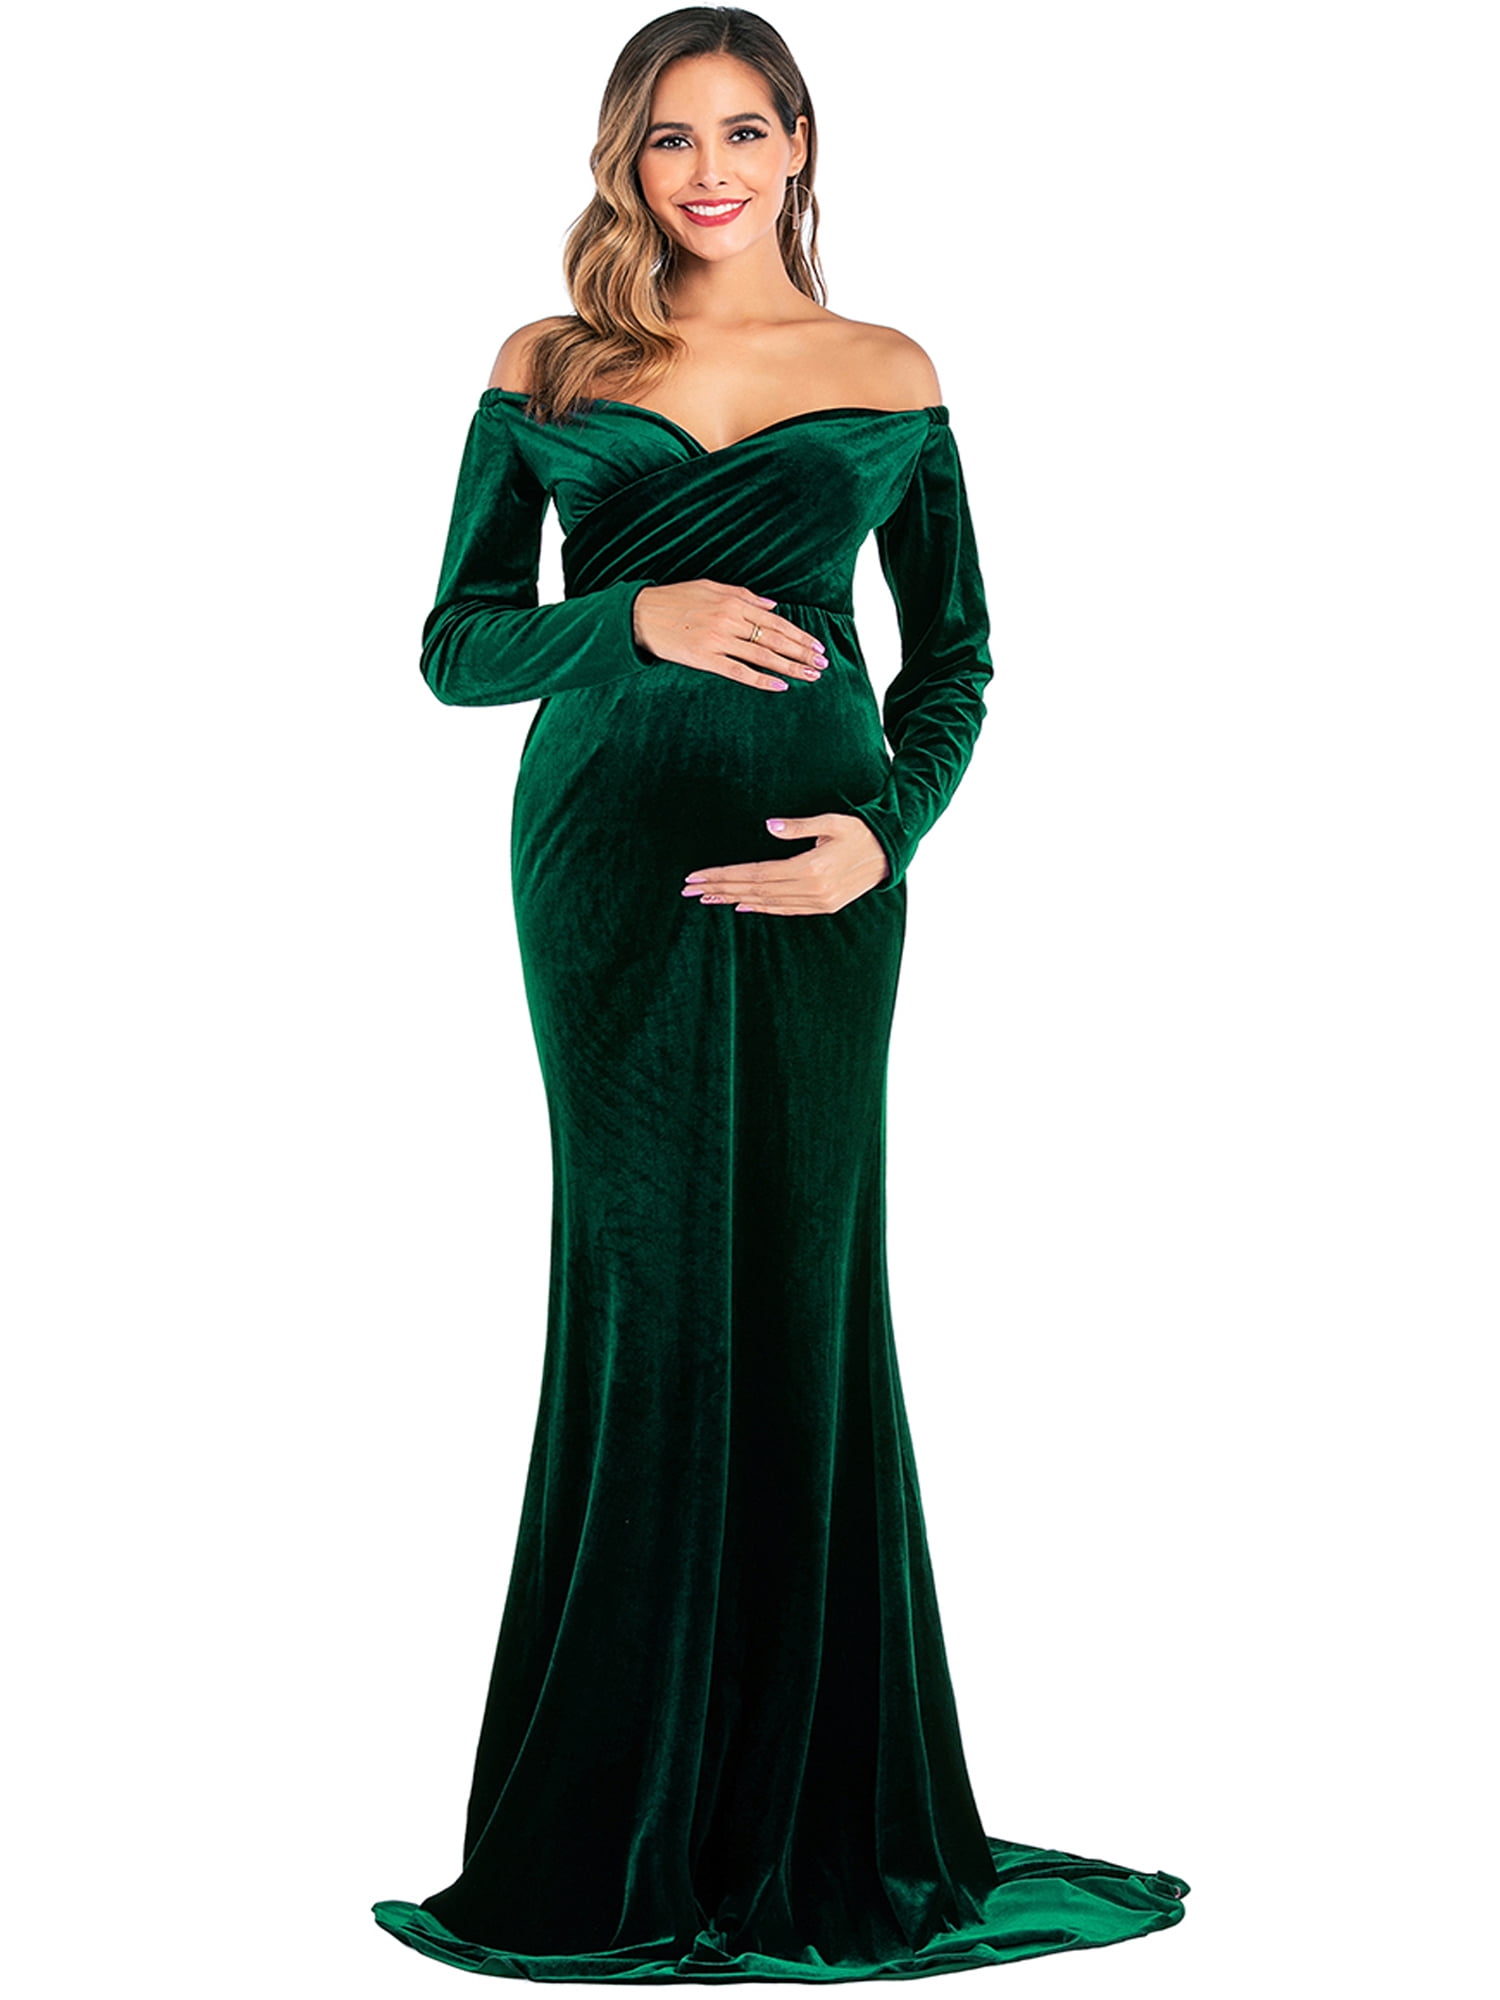 Bomotoo Maternity Photography Sleeveless Chiffon Long Dress Ruched Pleated  Pregnancy Gown for Baby Shower Photo Shoot - Walmart.com